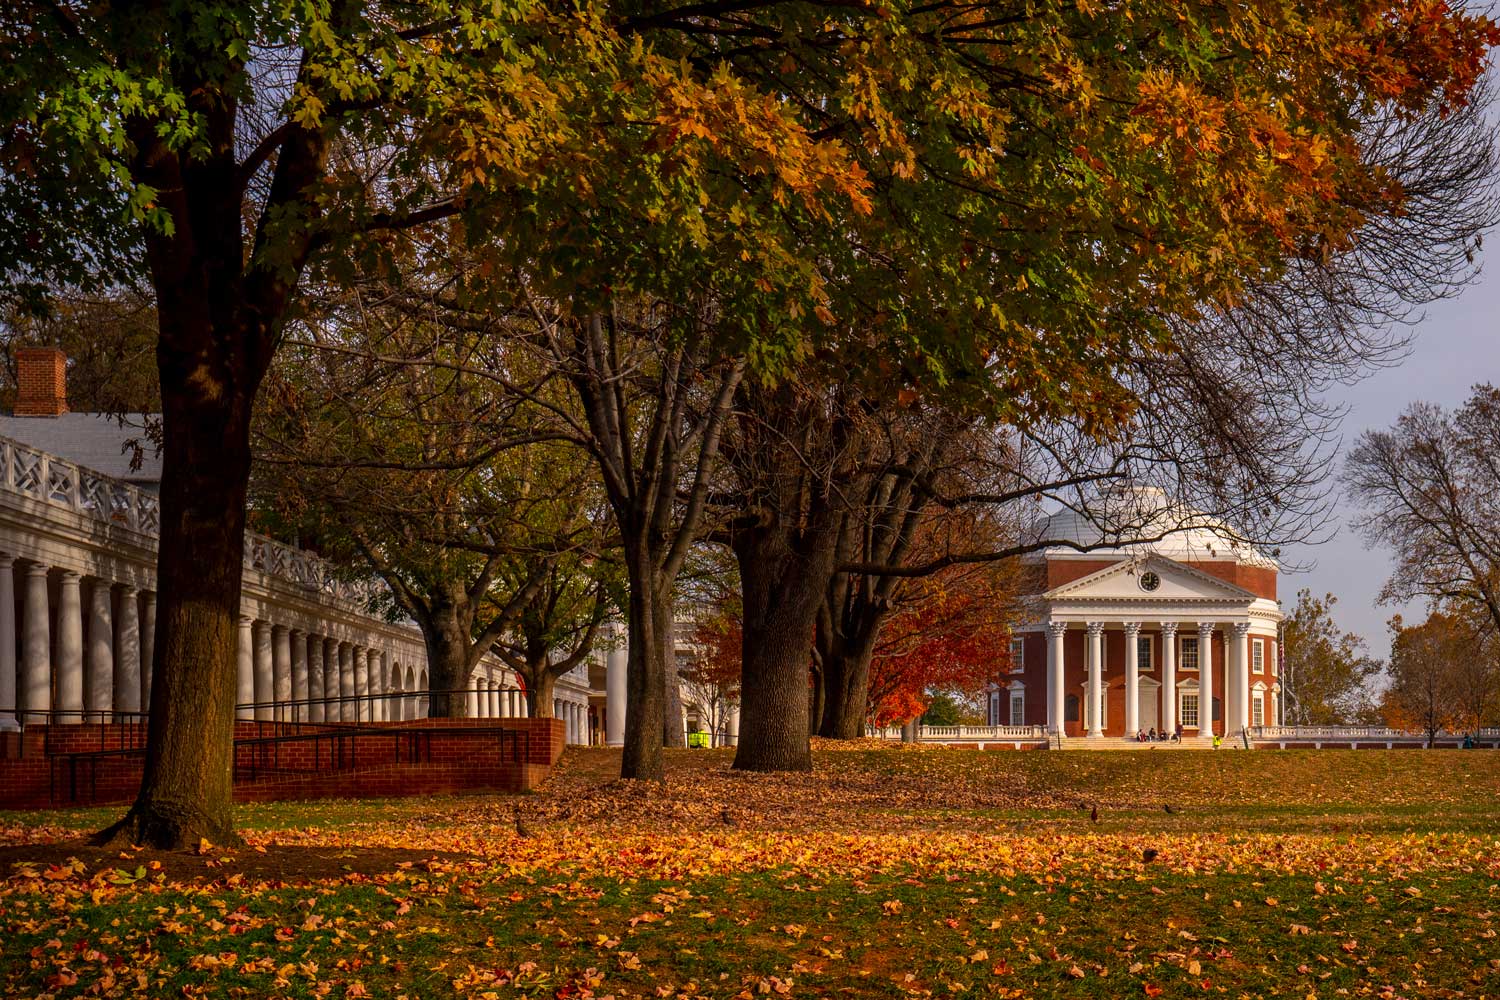 Rotunda with the Lawn trees changing from green to yellow, red, and orange, and falling to the ground